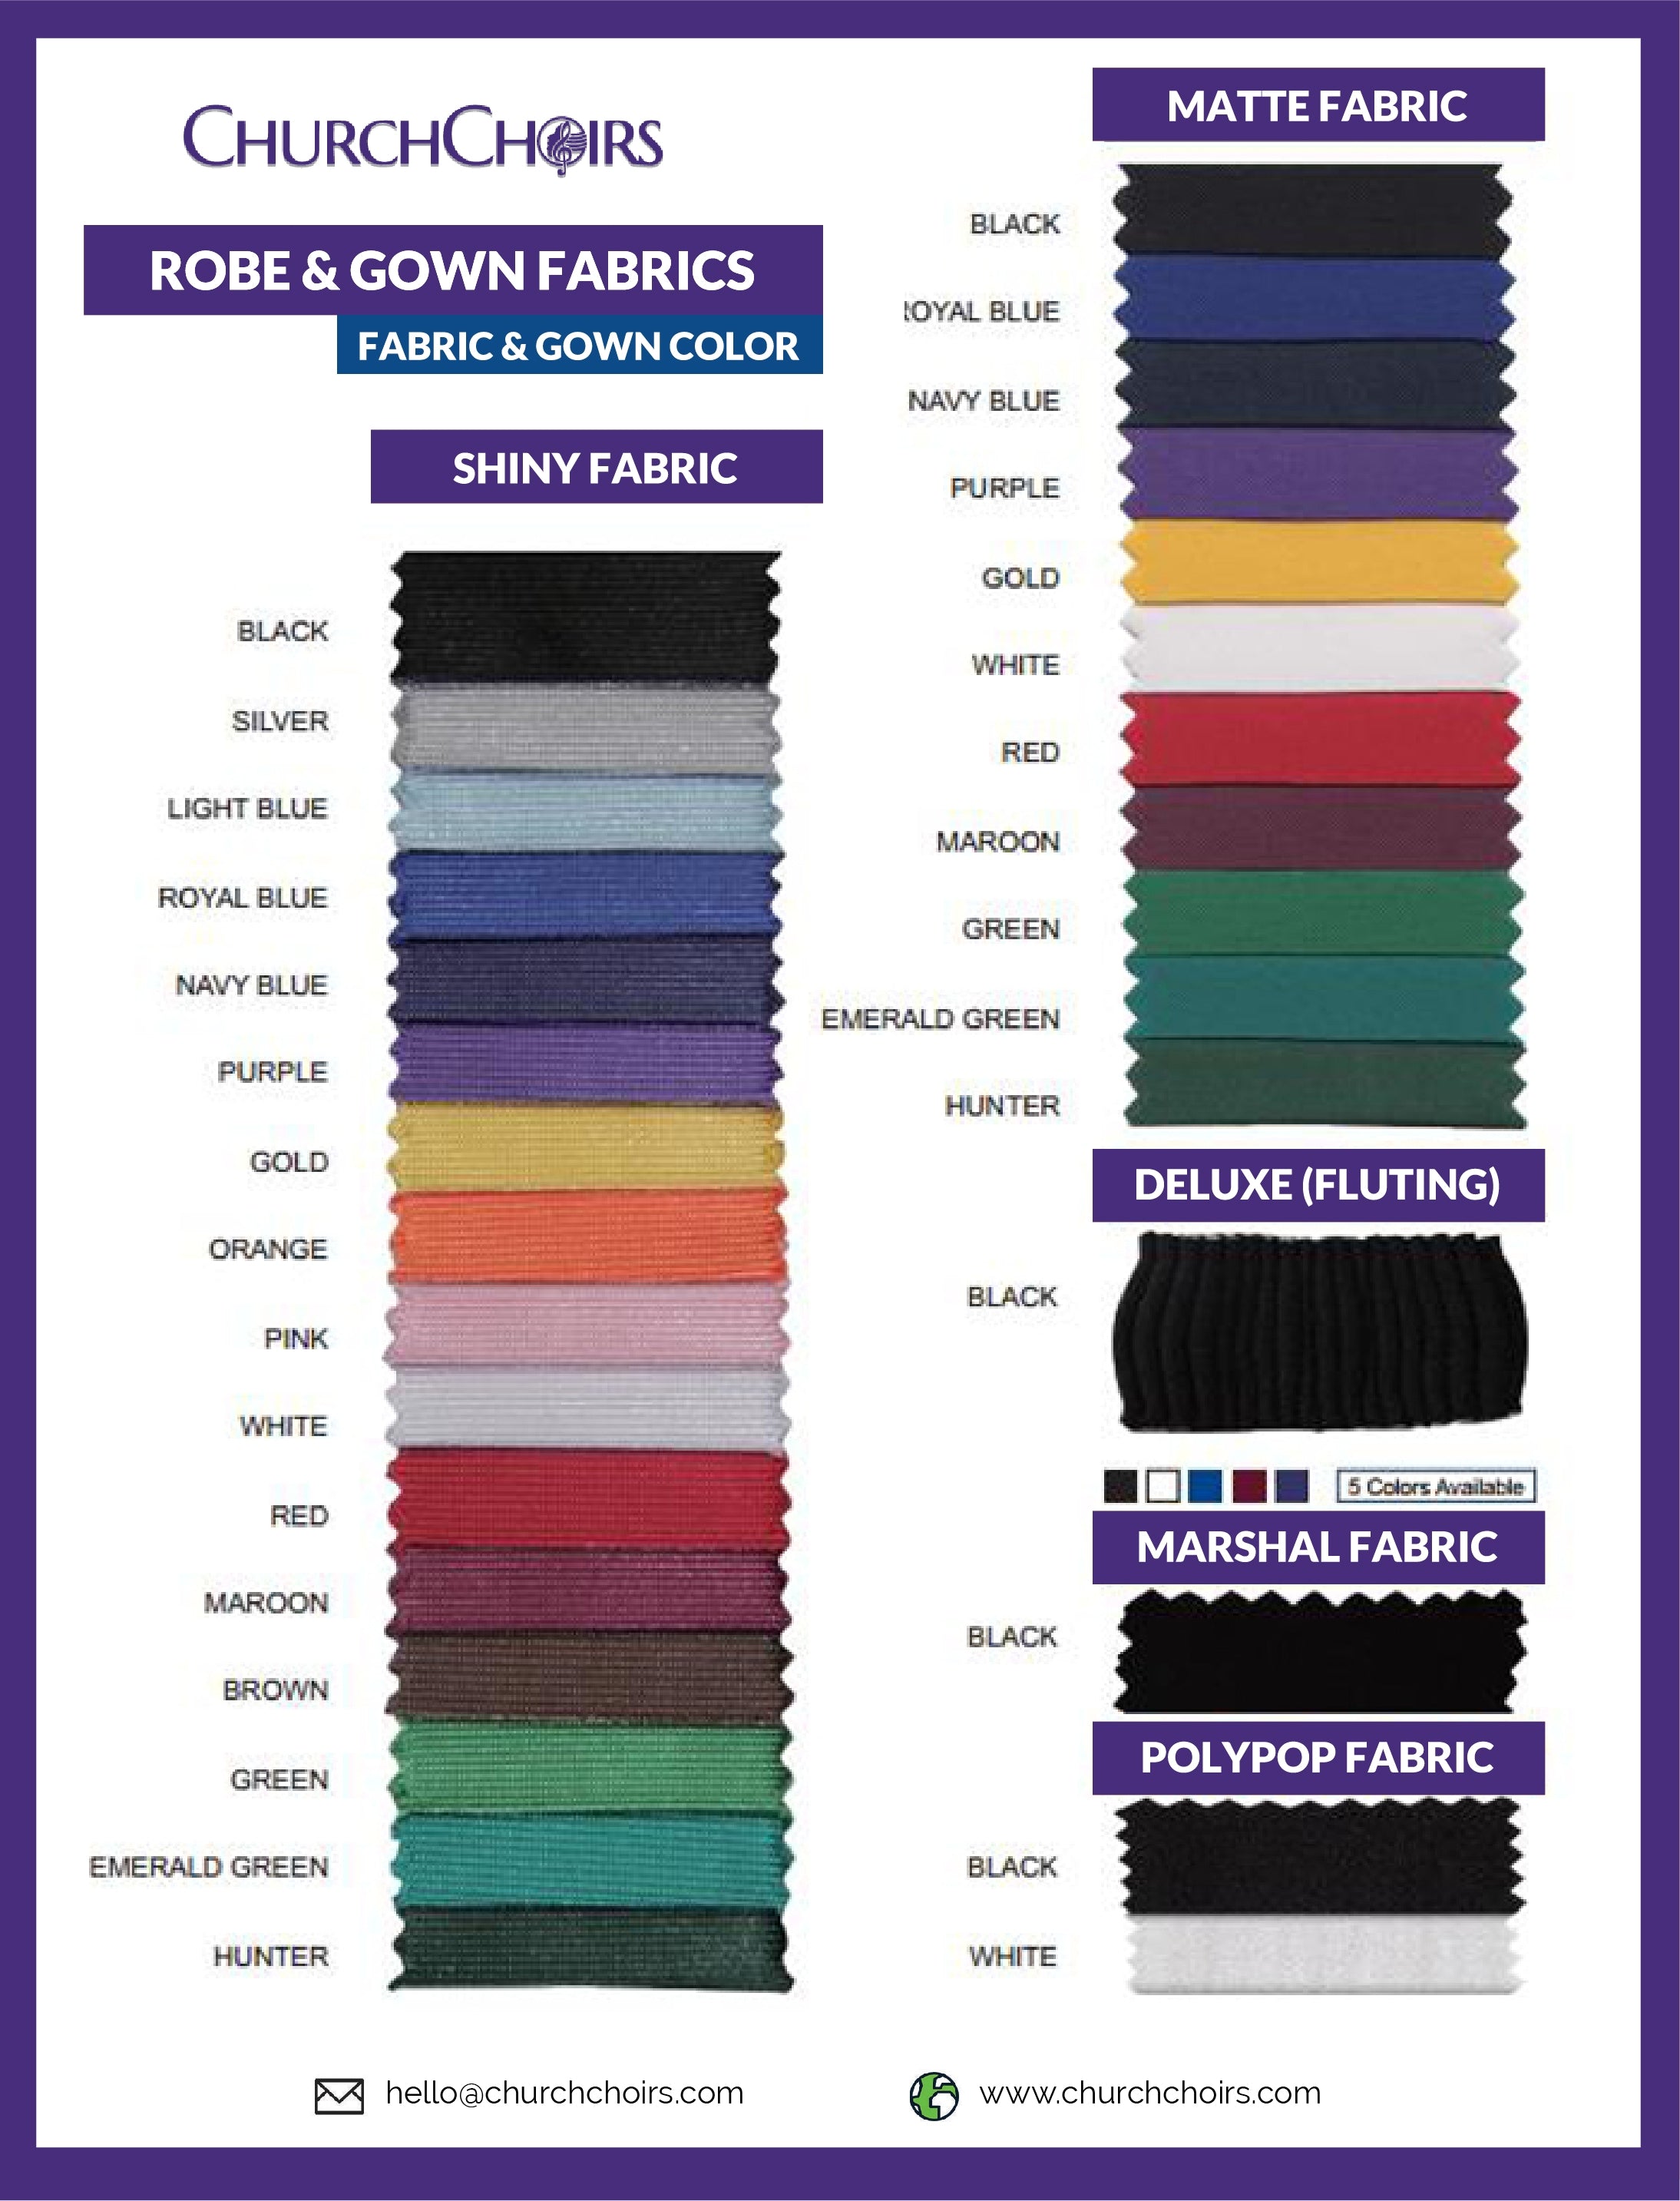 FABRIC / COLOR GUIDE